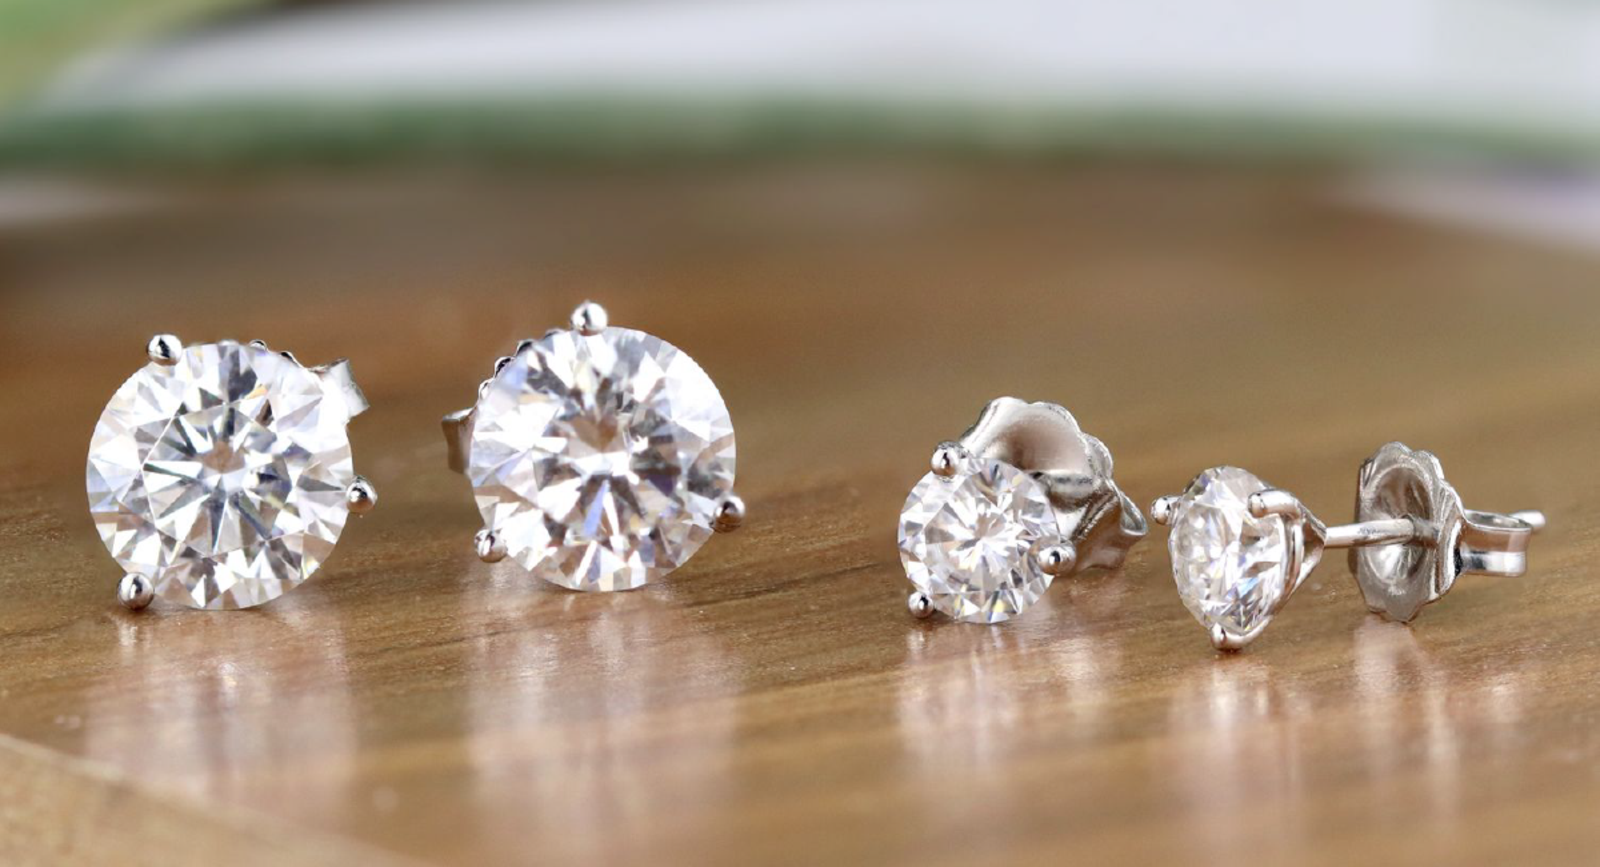 Is There A Downside To Lab-grown Diamonds?